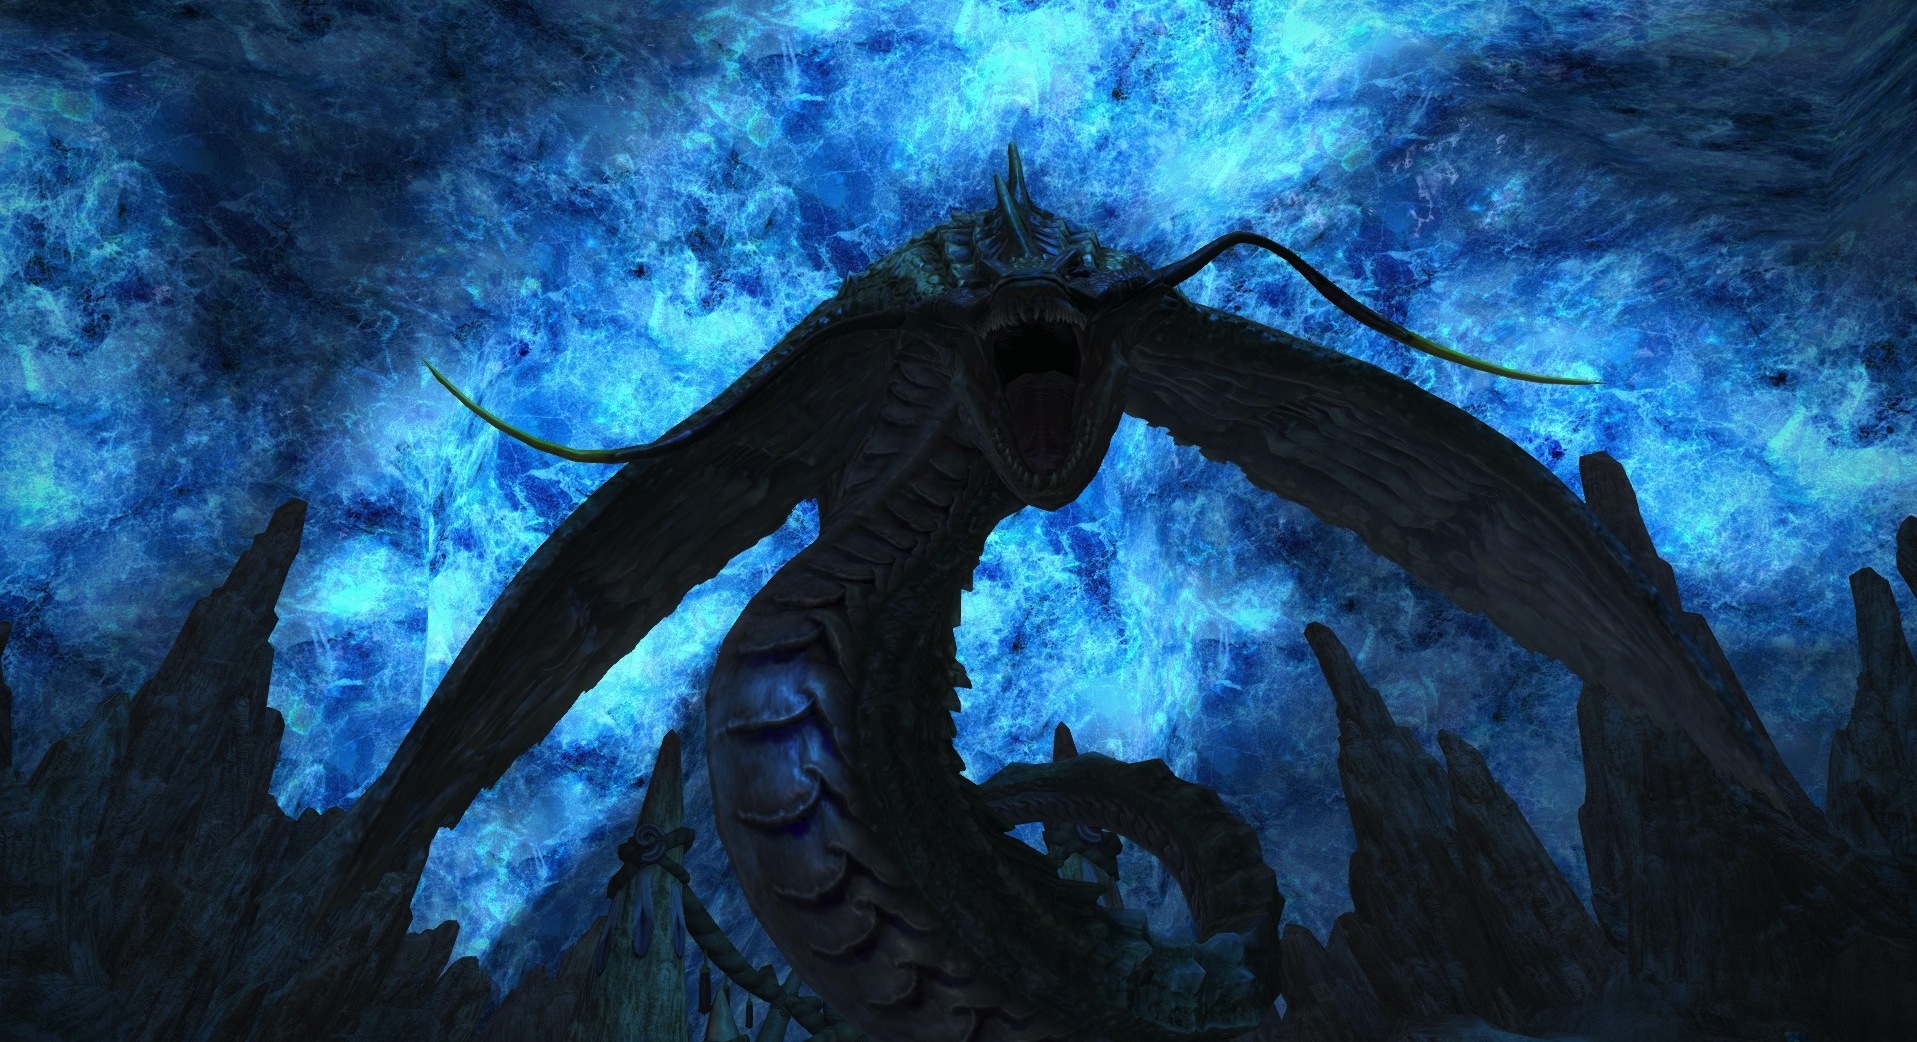 Final Fantasy XIV: Heavensward Theme Song Revealed, Jobs and Dungeons Also Showcased